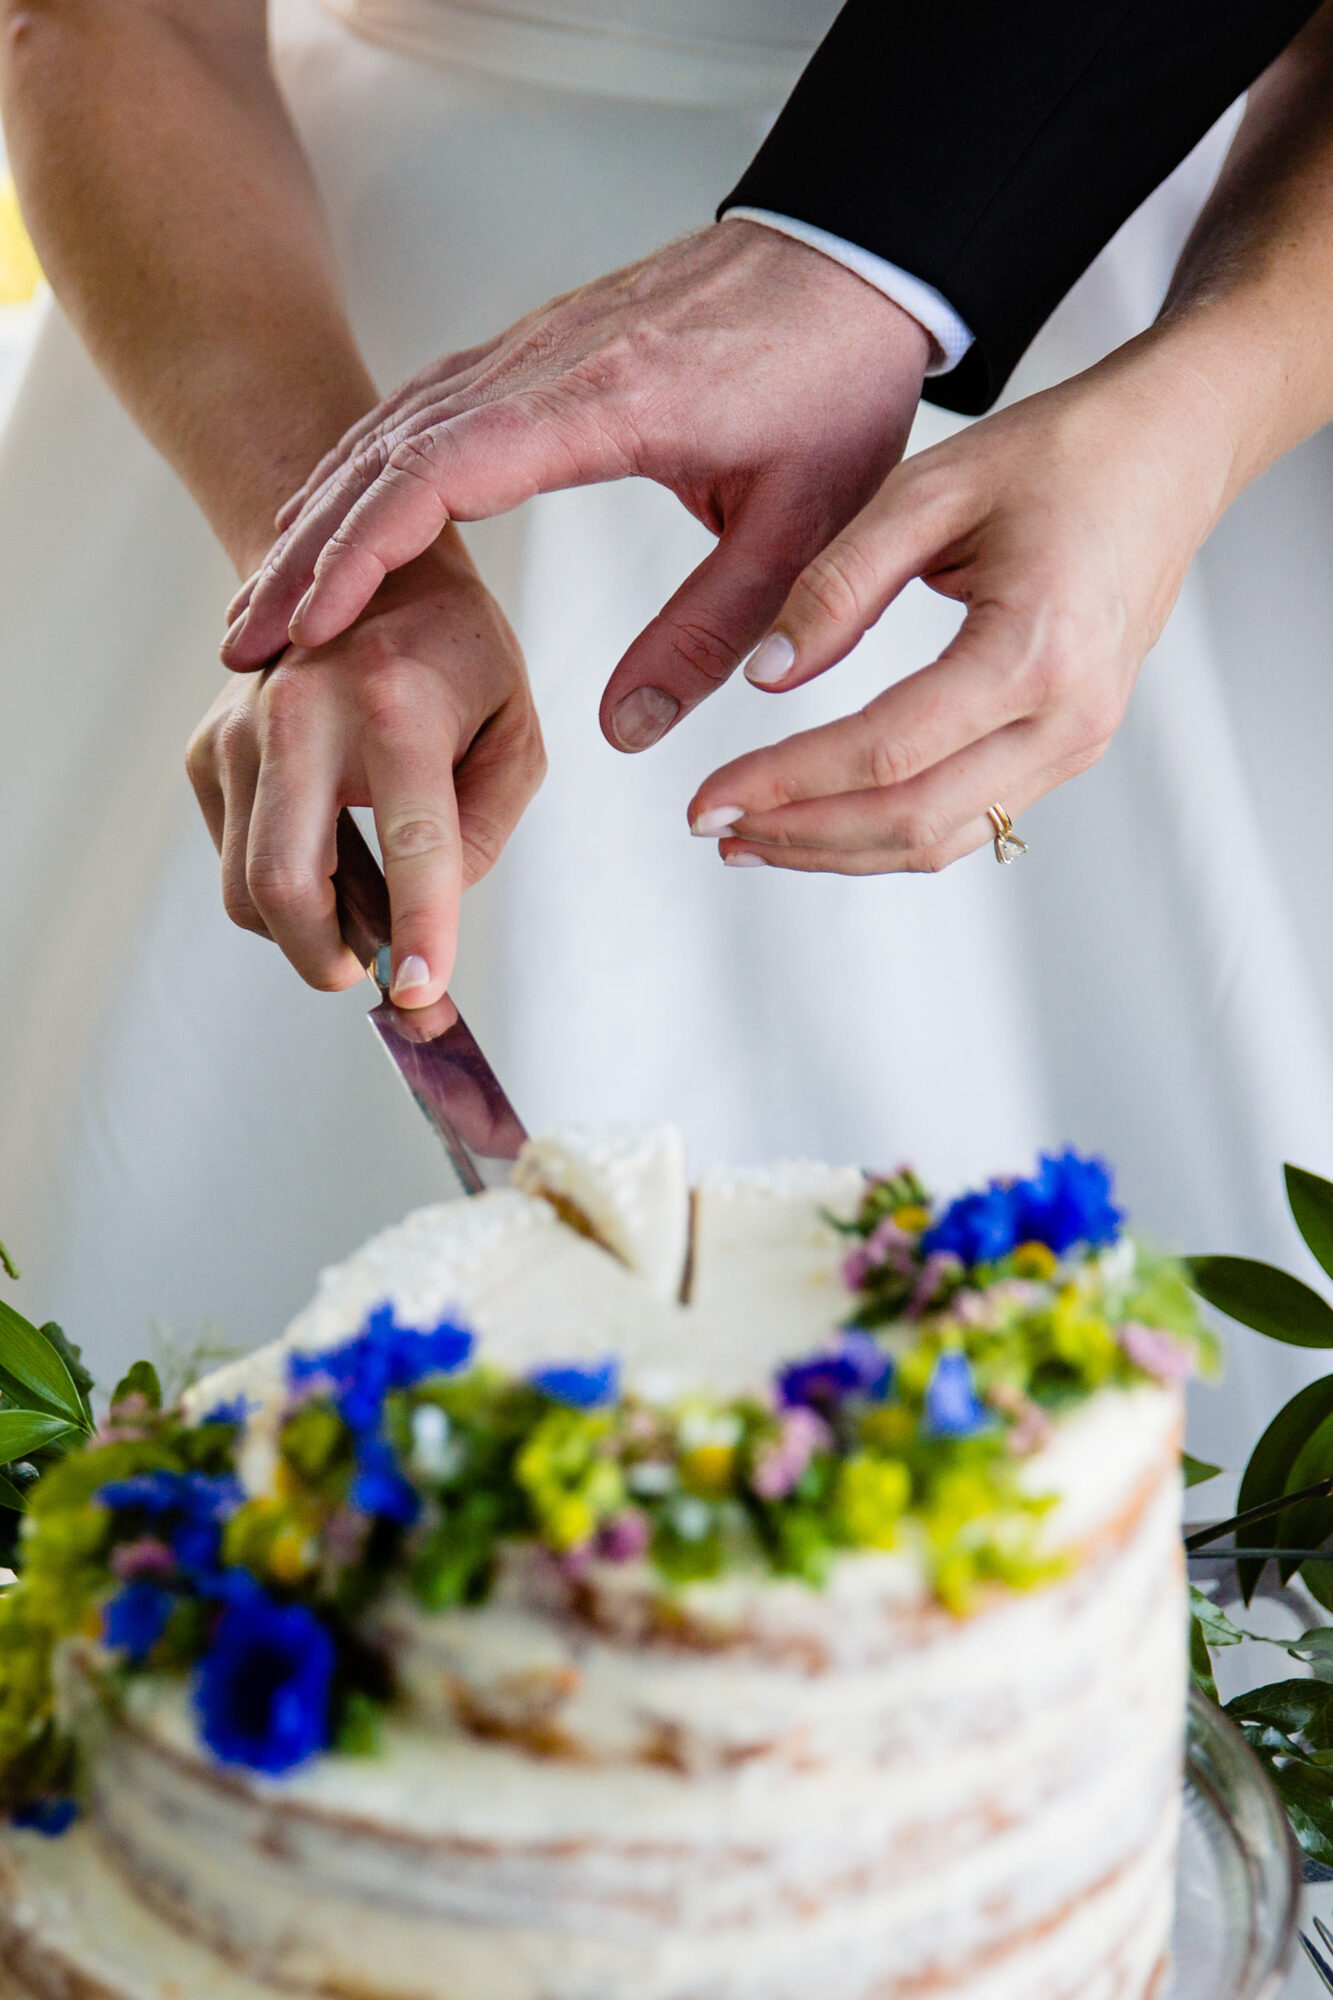 The hands of a wedding couple cutting their cake.